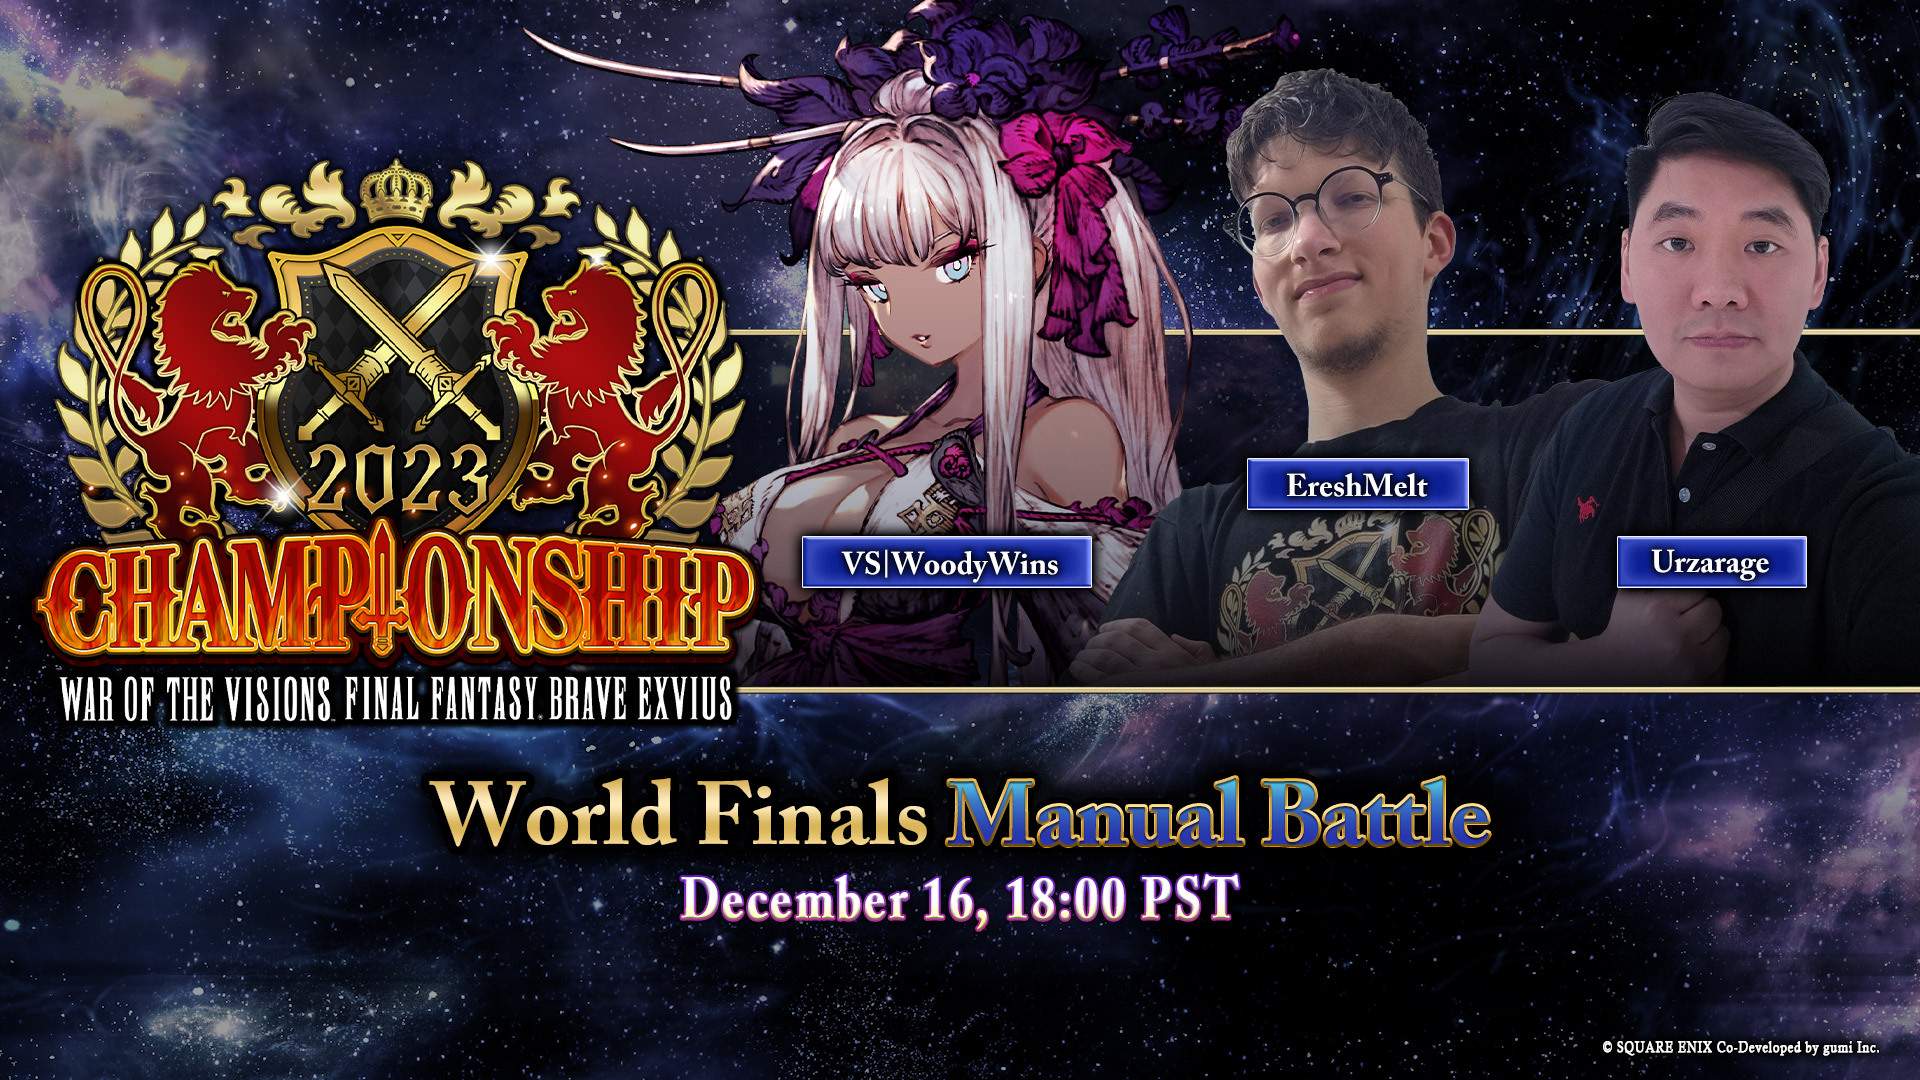 WAR OF THE VISIONS FINAL FANTASY BRAVE EXVIUS World Finals Manual Battle goes live tomorrow!